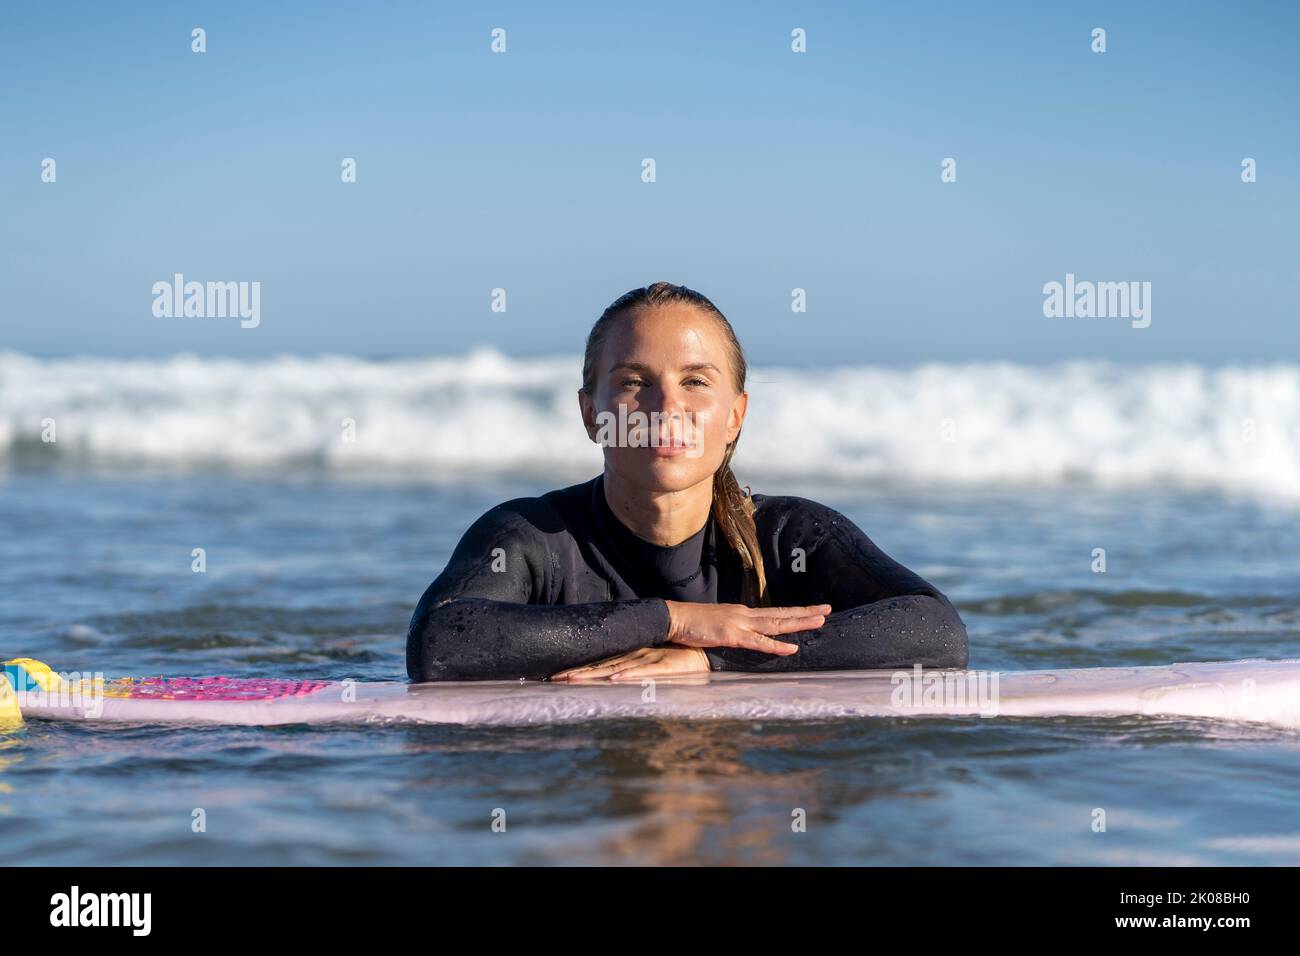 Surfer girl with her surfboard in the water. Female surfer woman Stock Photo